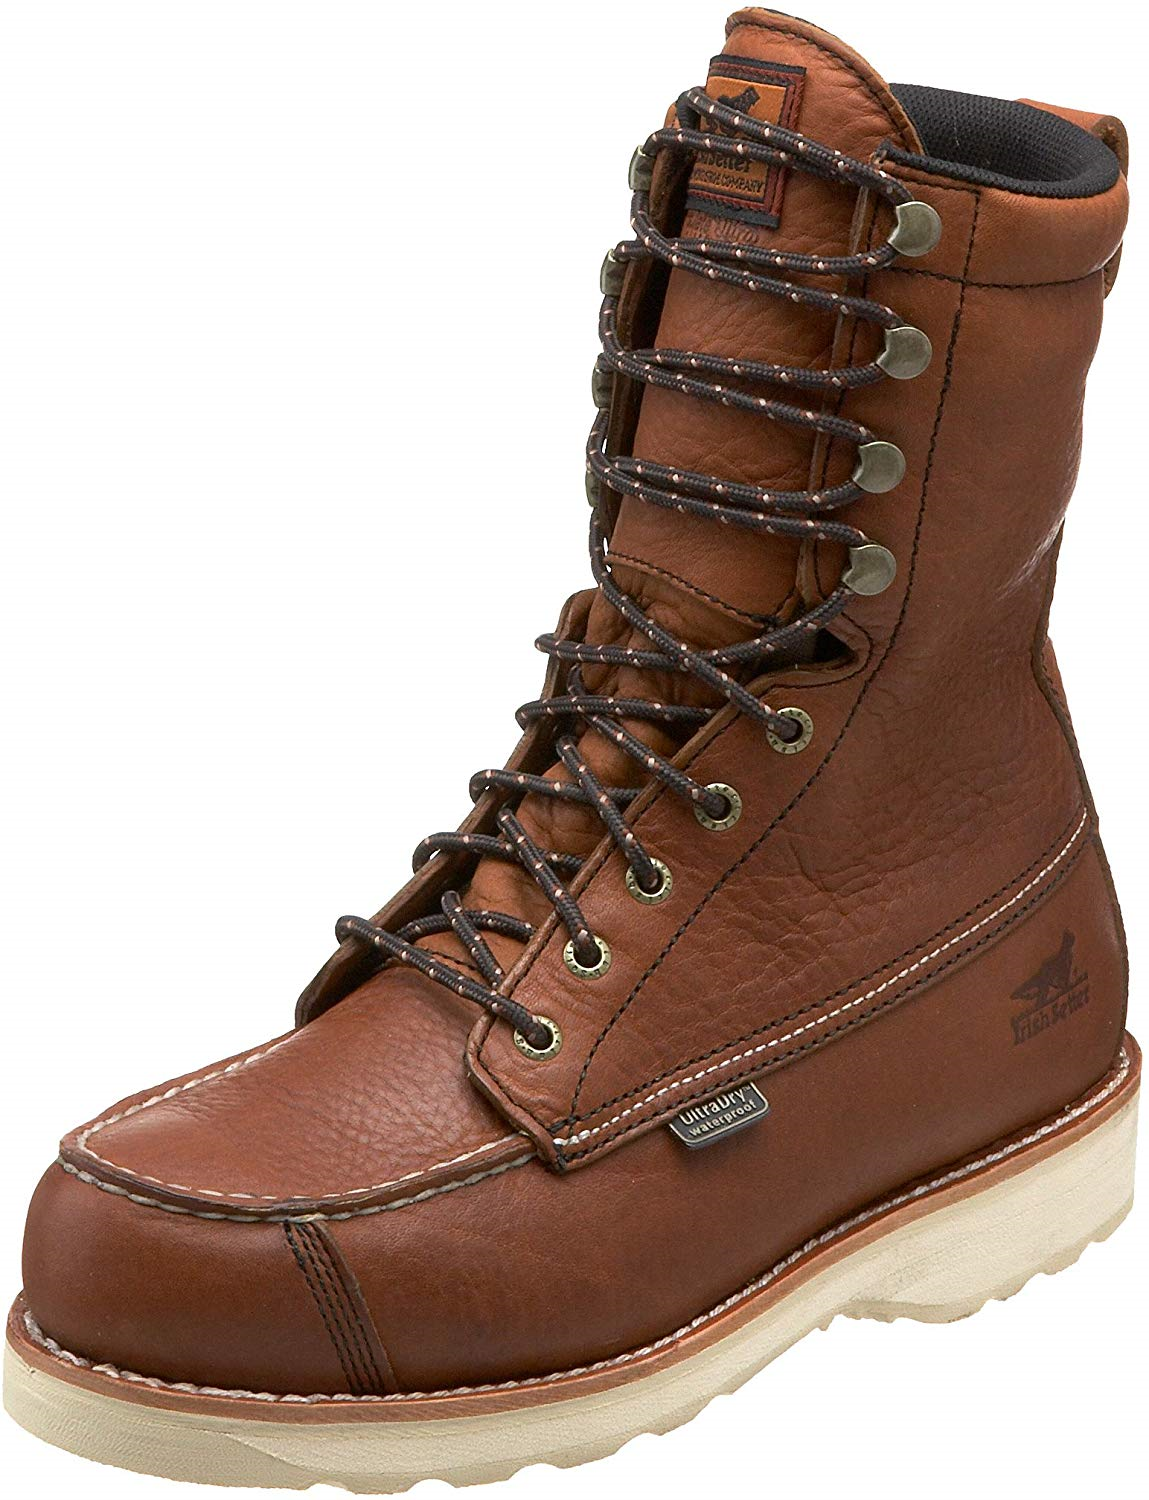 IRISH SETTER MENS 896 9" WINGSHOOTER UPLAND INSULATED HUNTING BOOTS